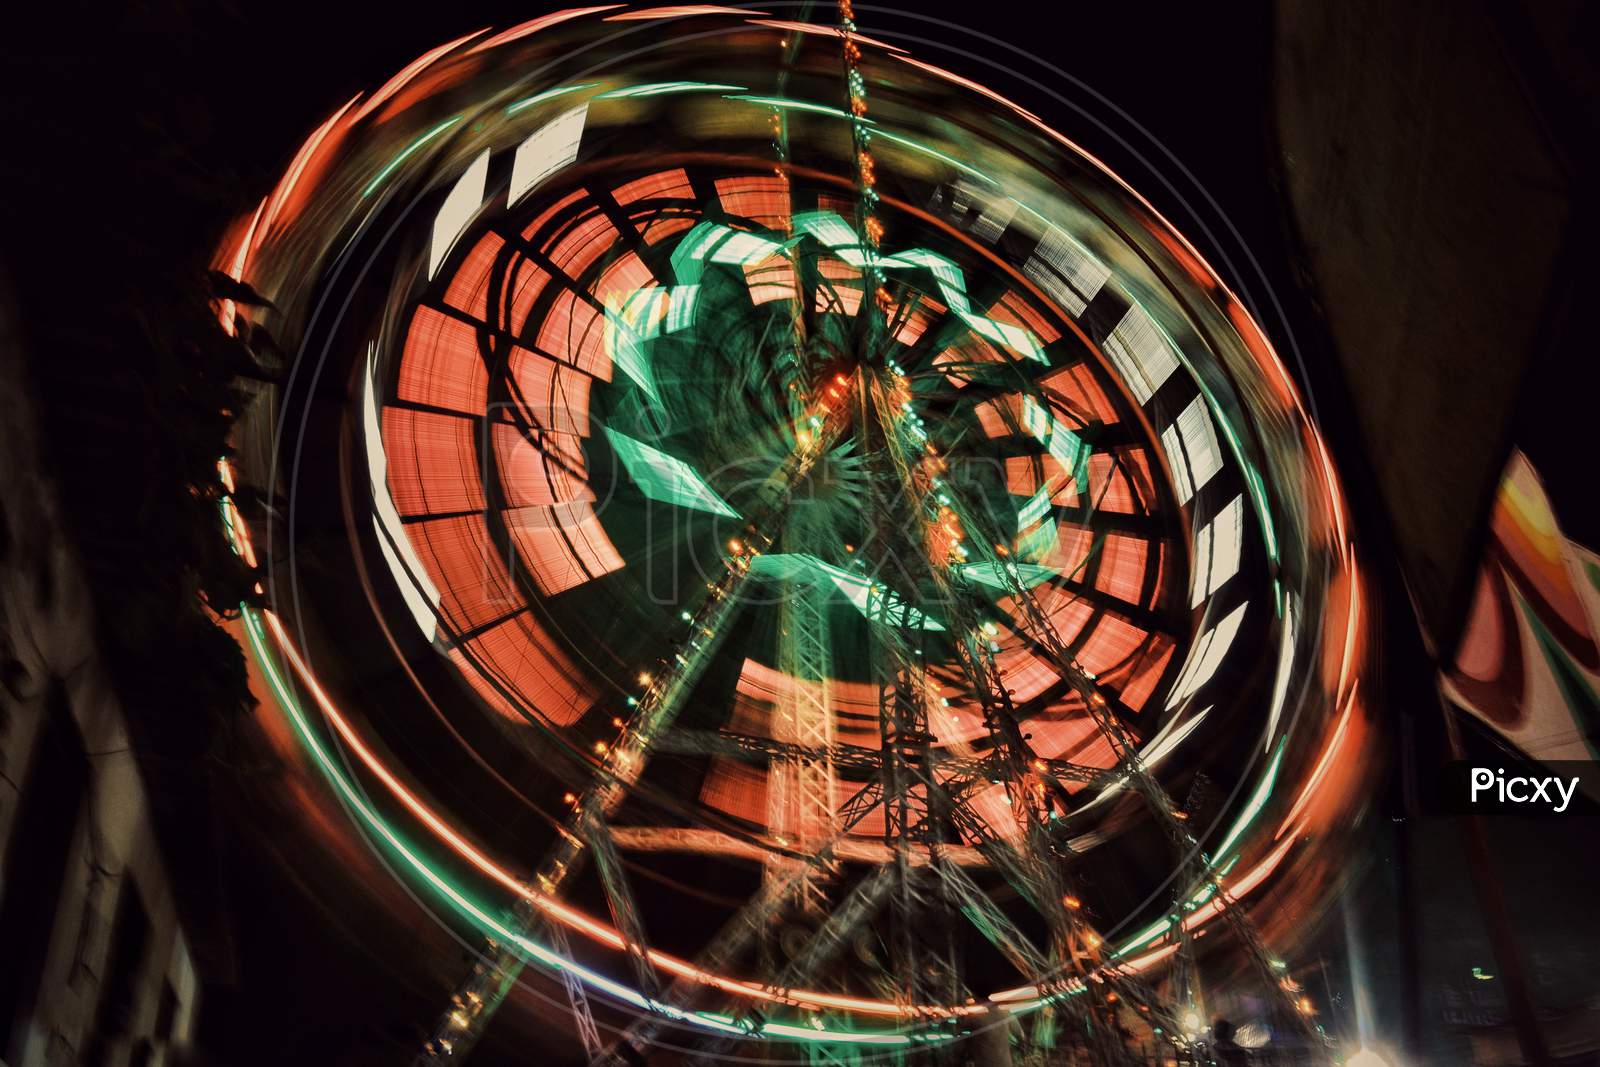 Long Exposure Of an Giant Wheel With Neon Lights   In a Fair